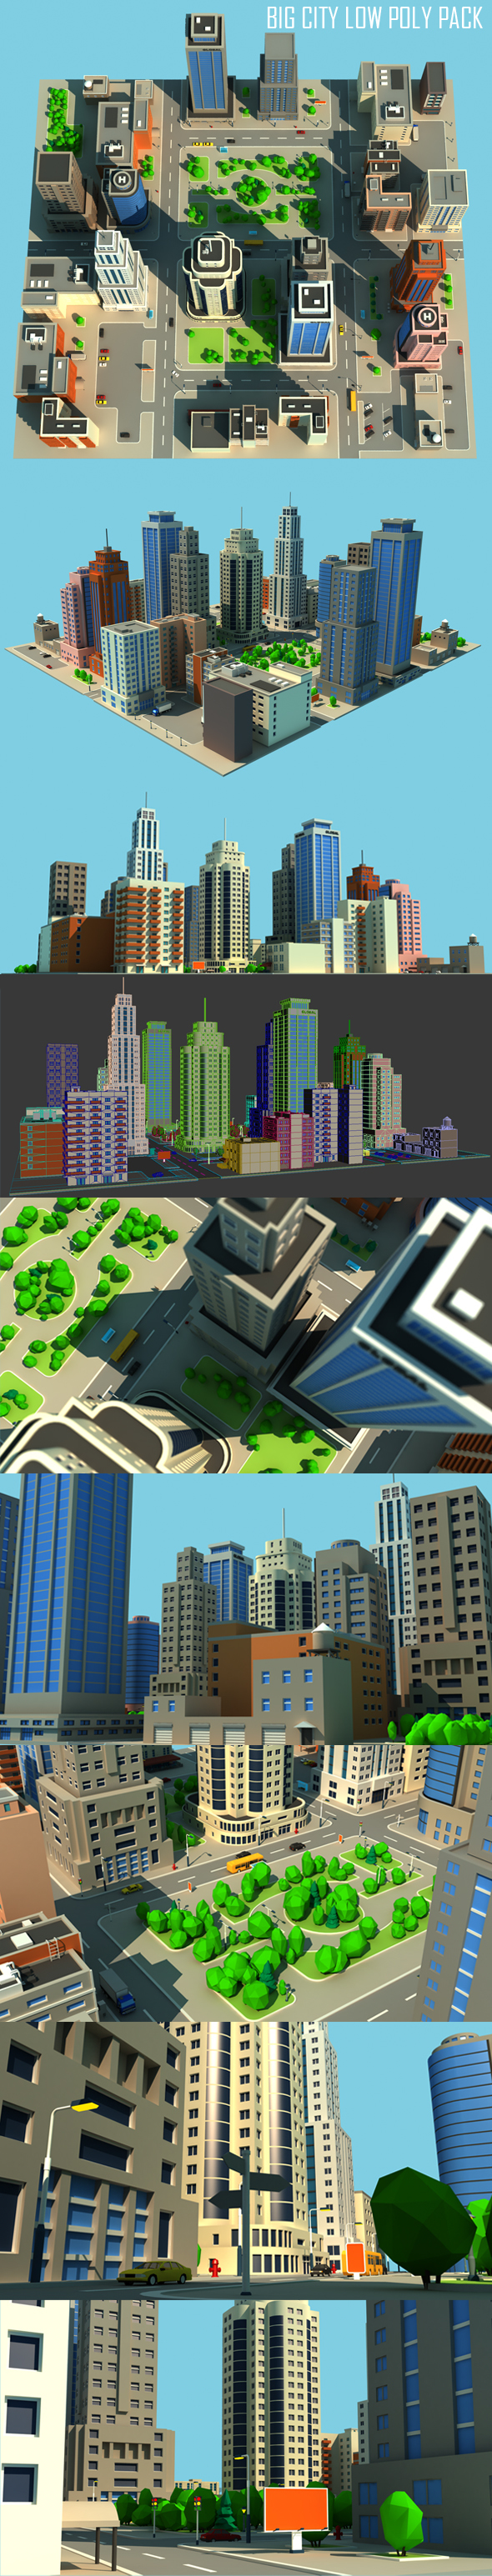 Big City Low Poly Pack